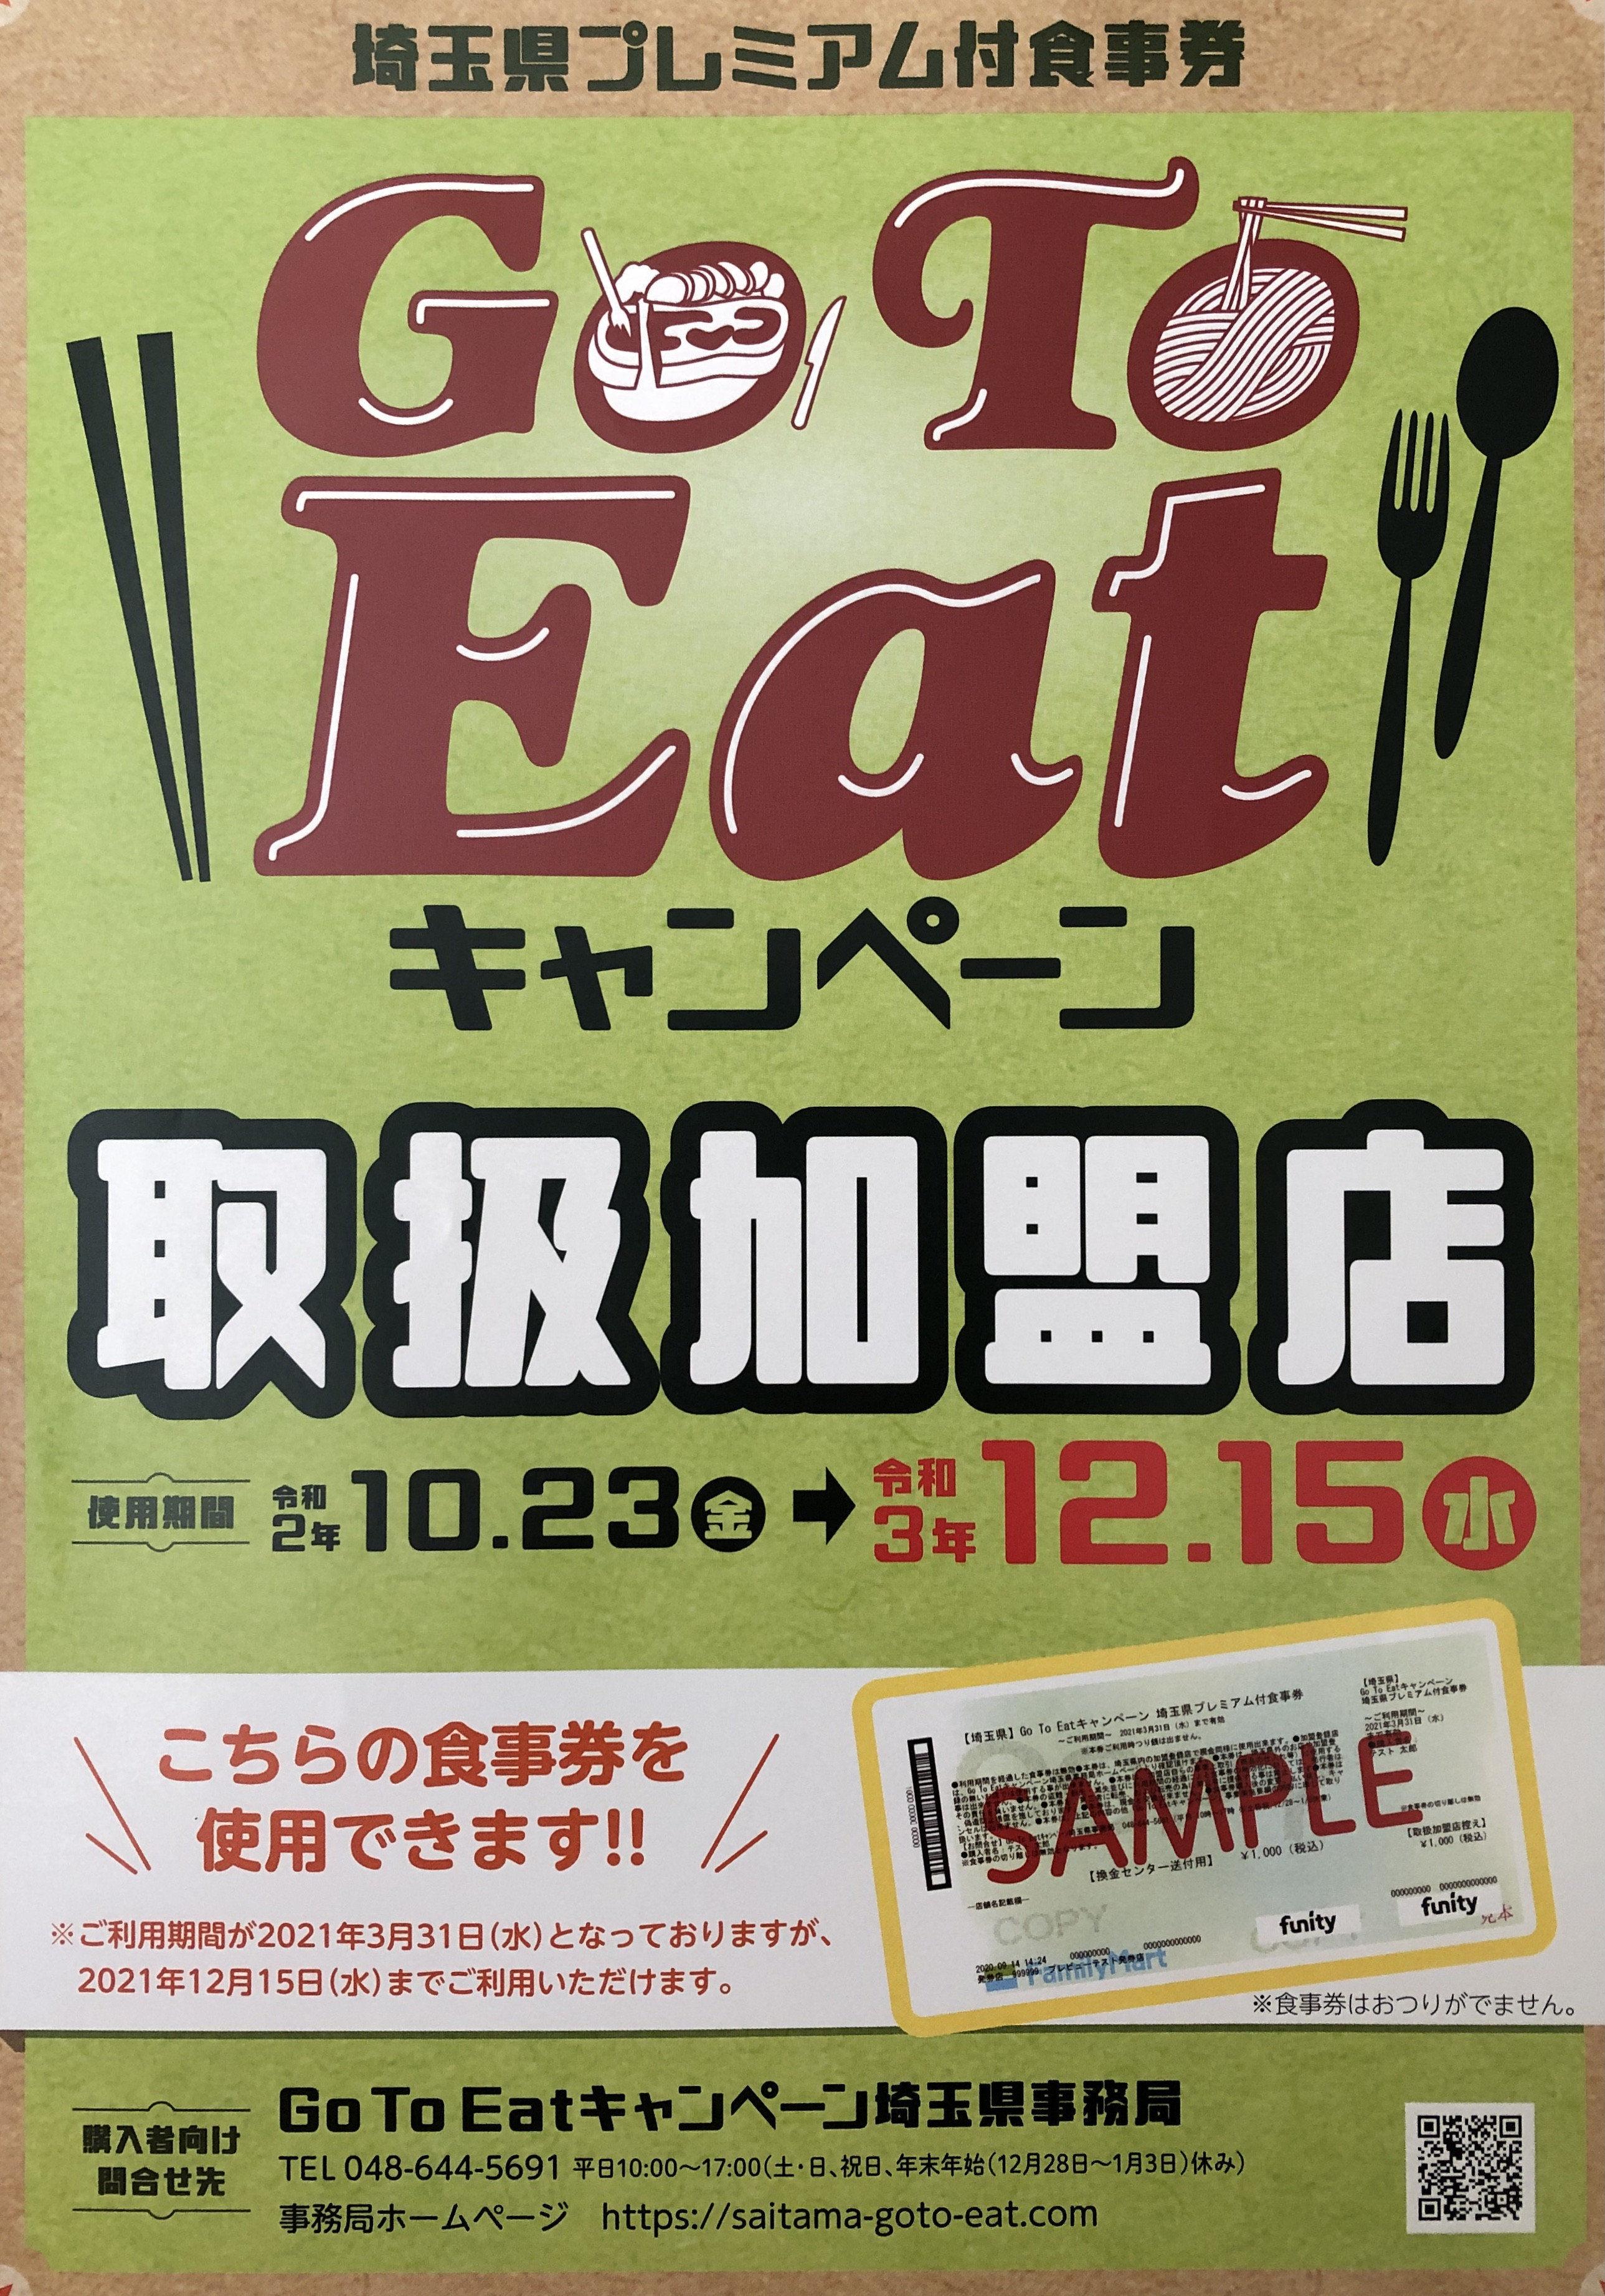 Go To Eat 延長！